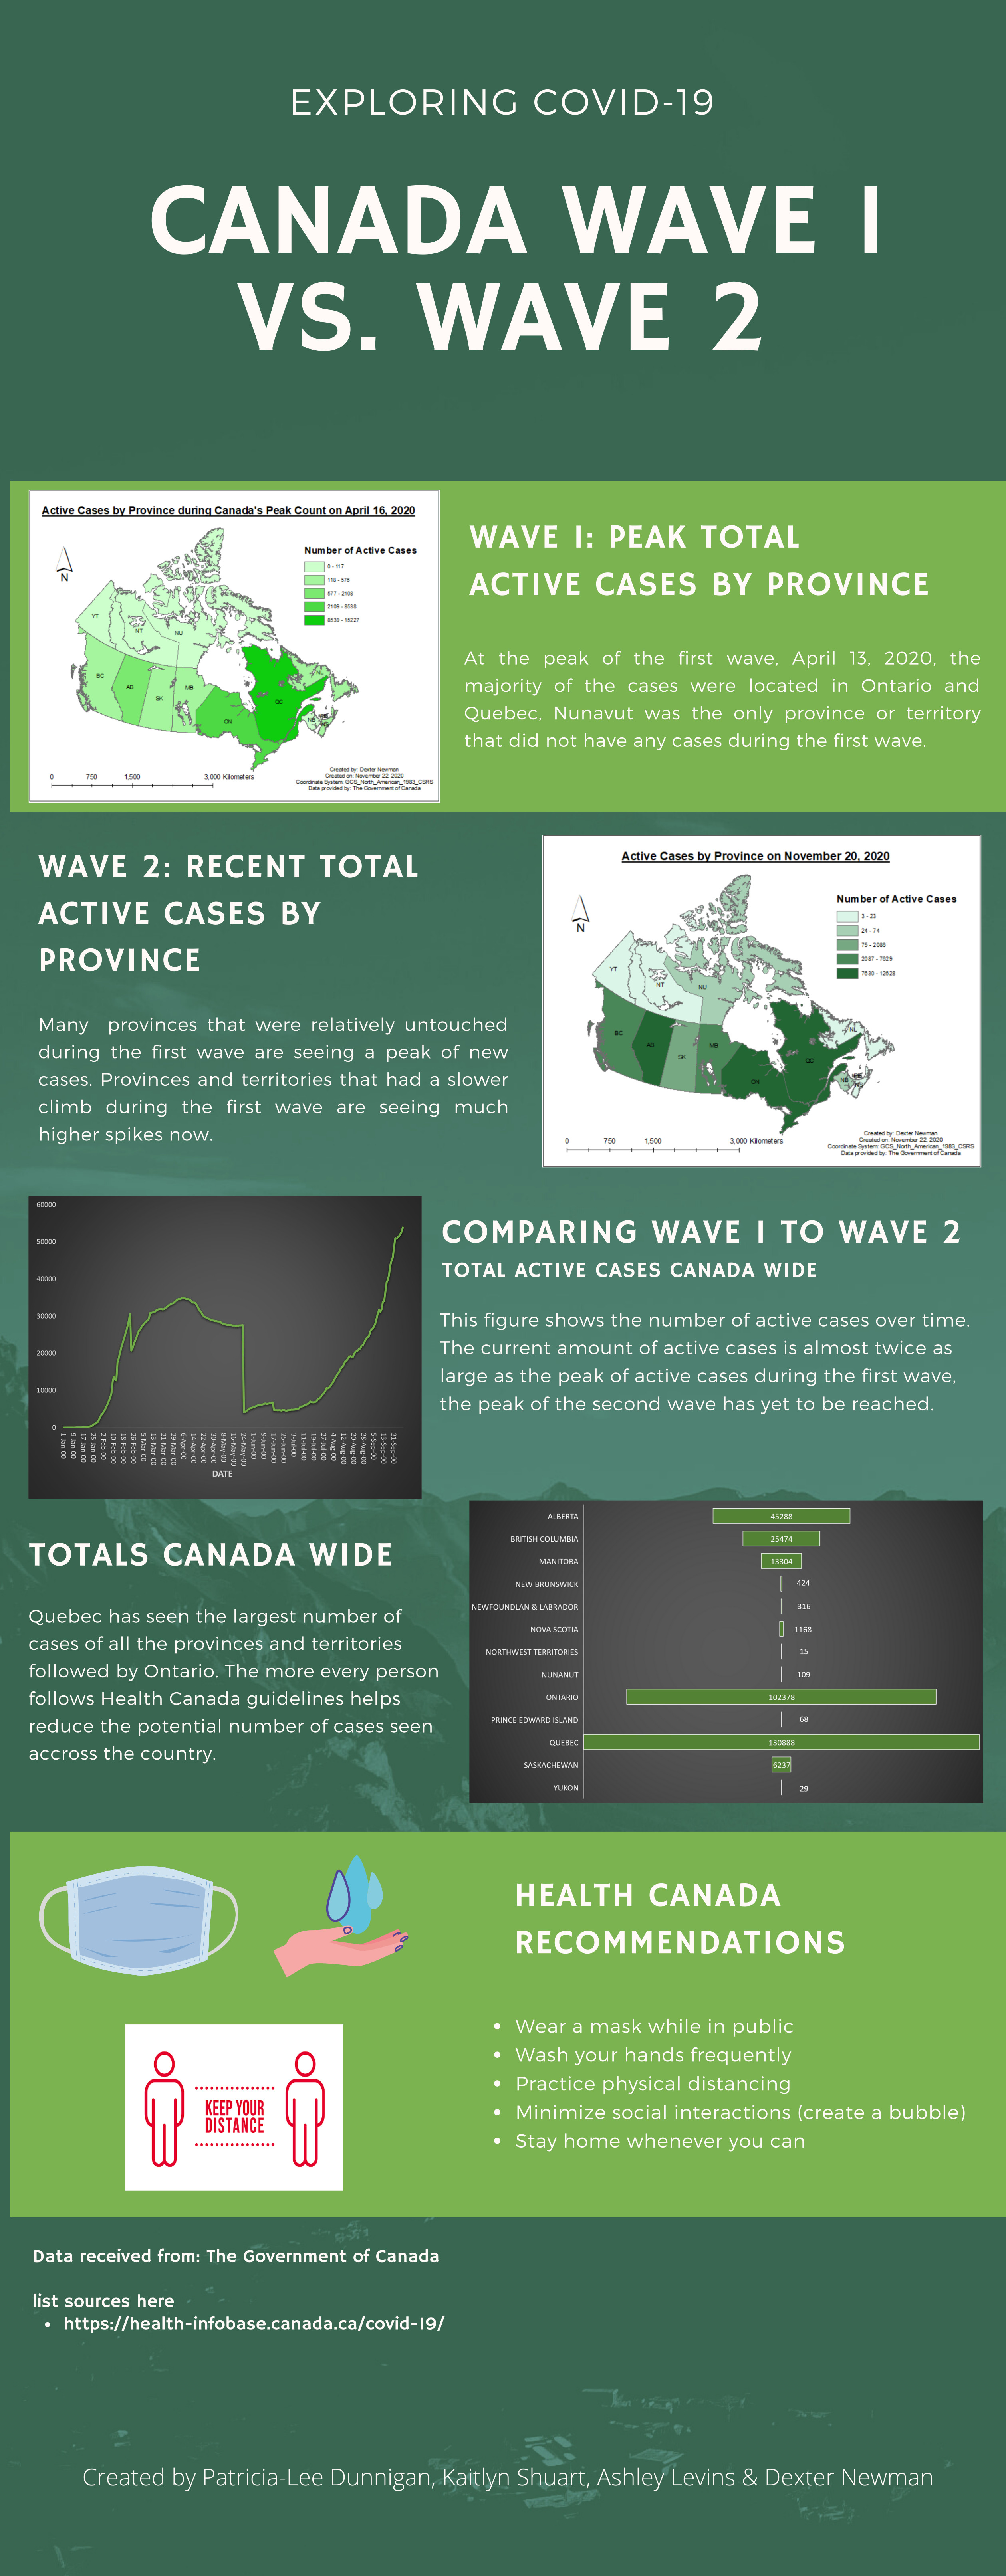 Infographic created by Dunnigan, Shuart, Levins & Newman for the Introduction to Geomatics course.